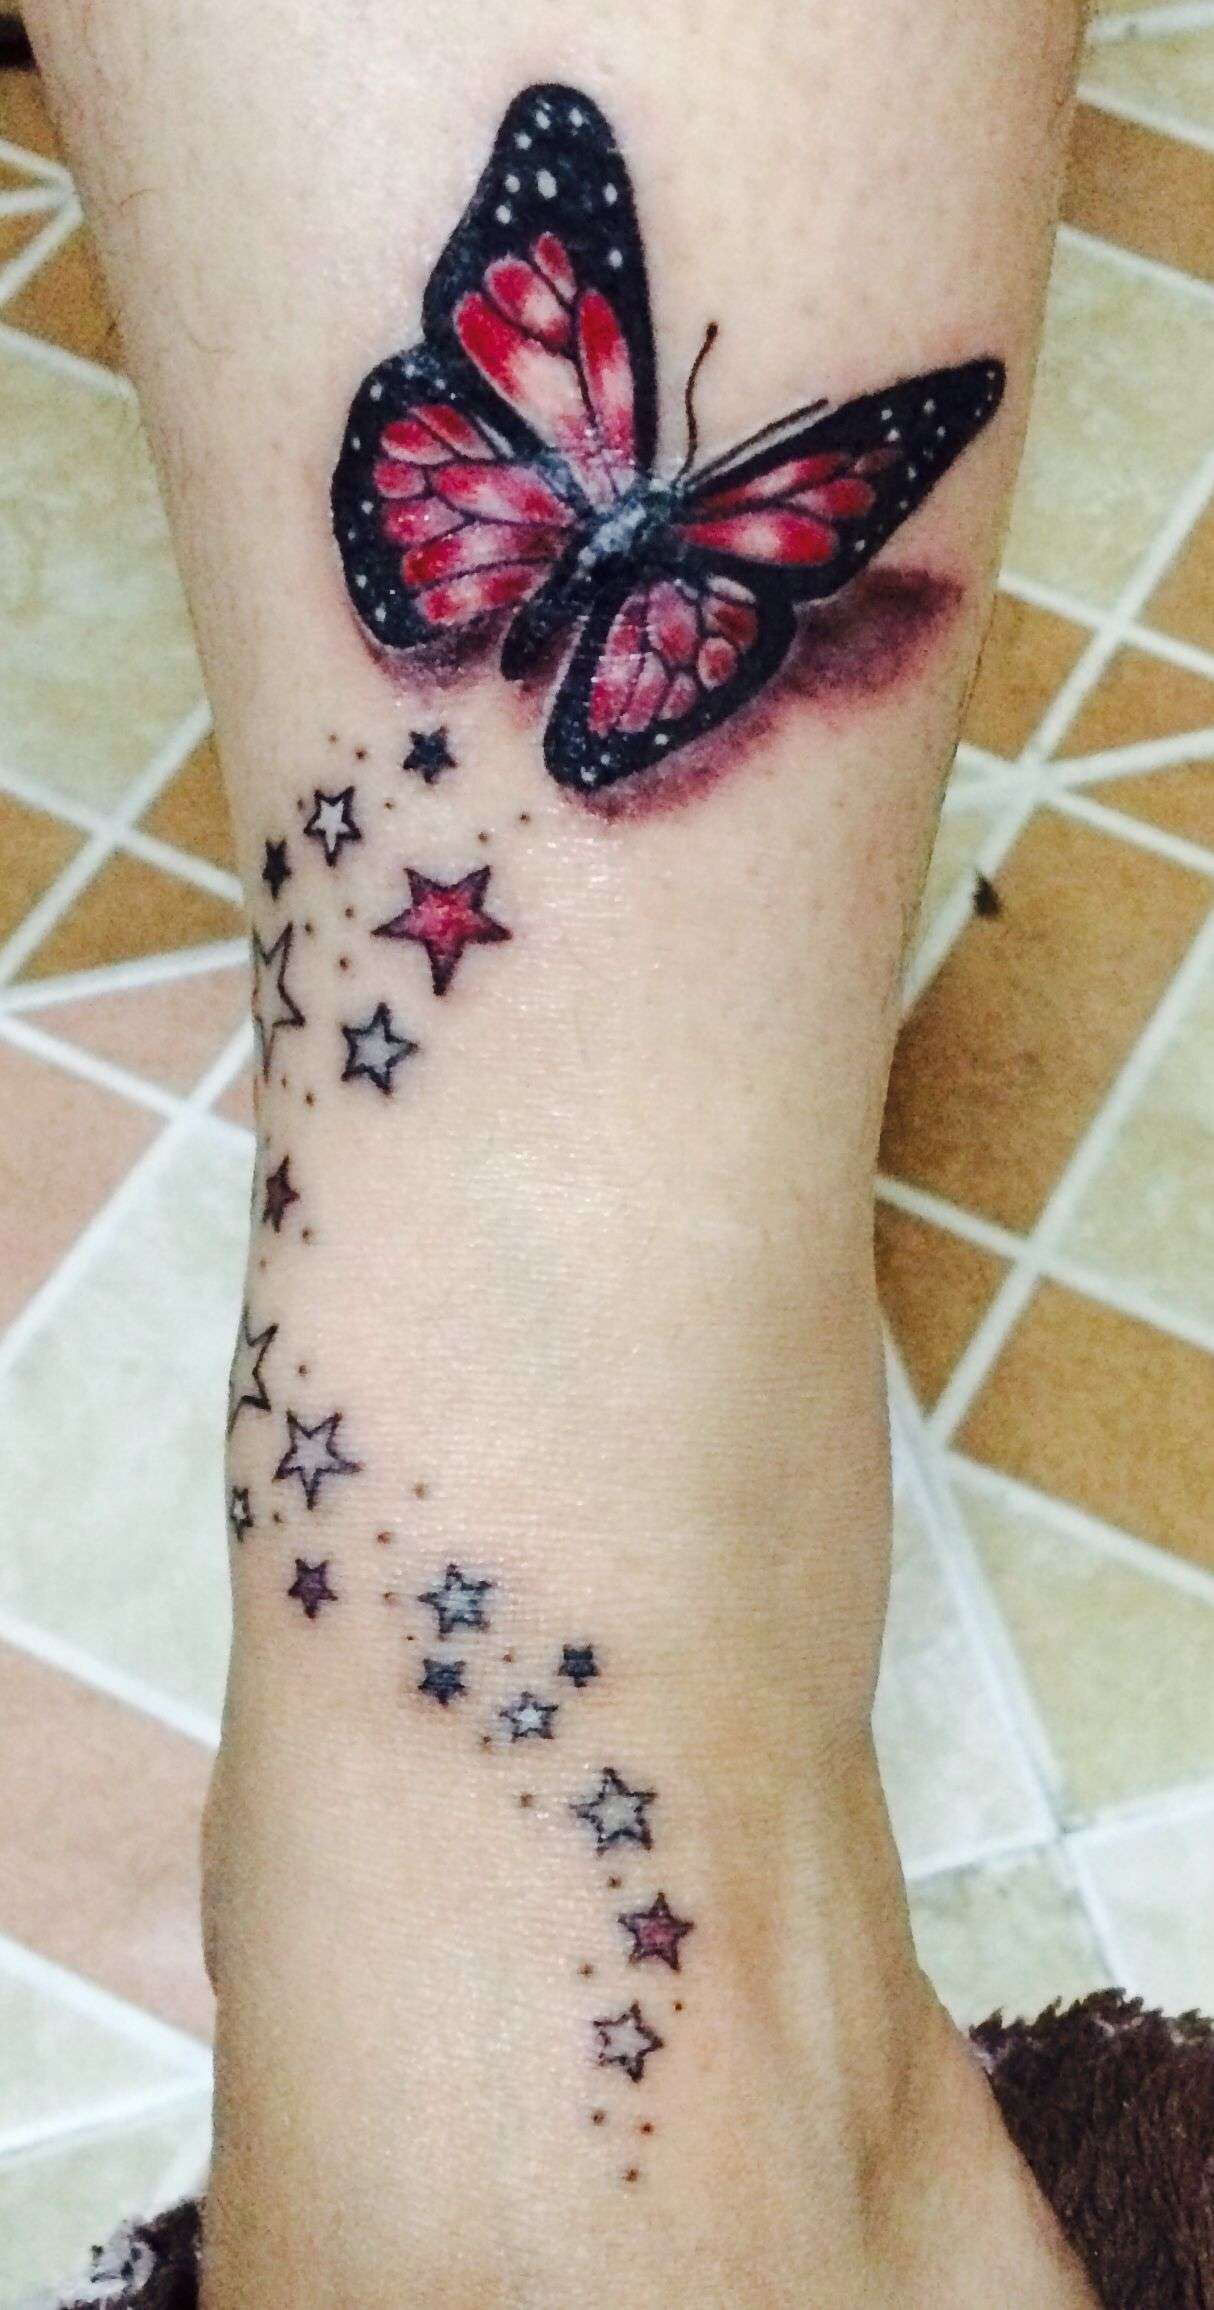 My very first tattoo... stardust butterfly covering a keloid scar ...